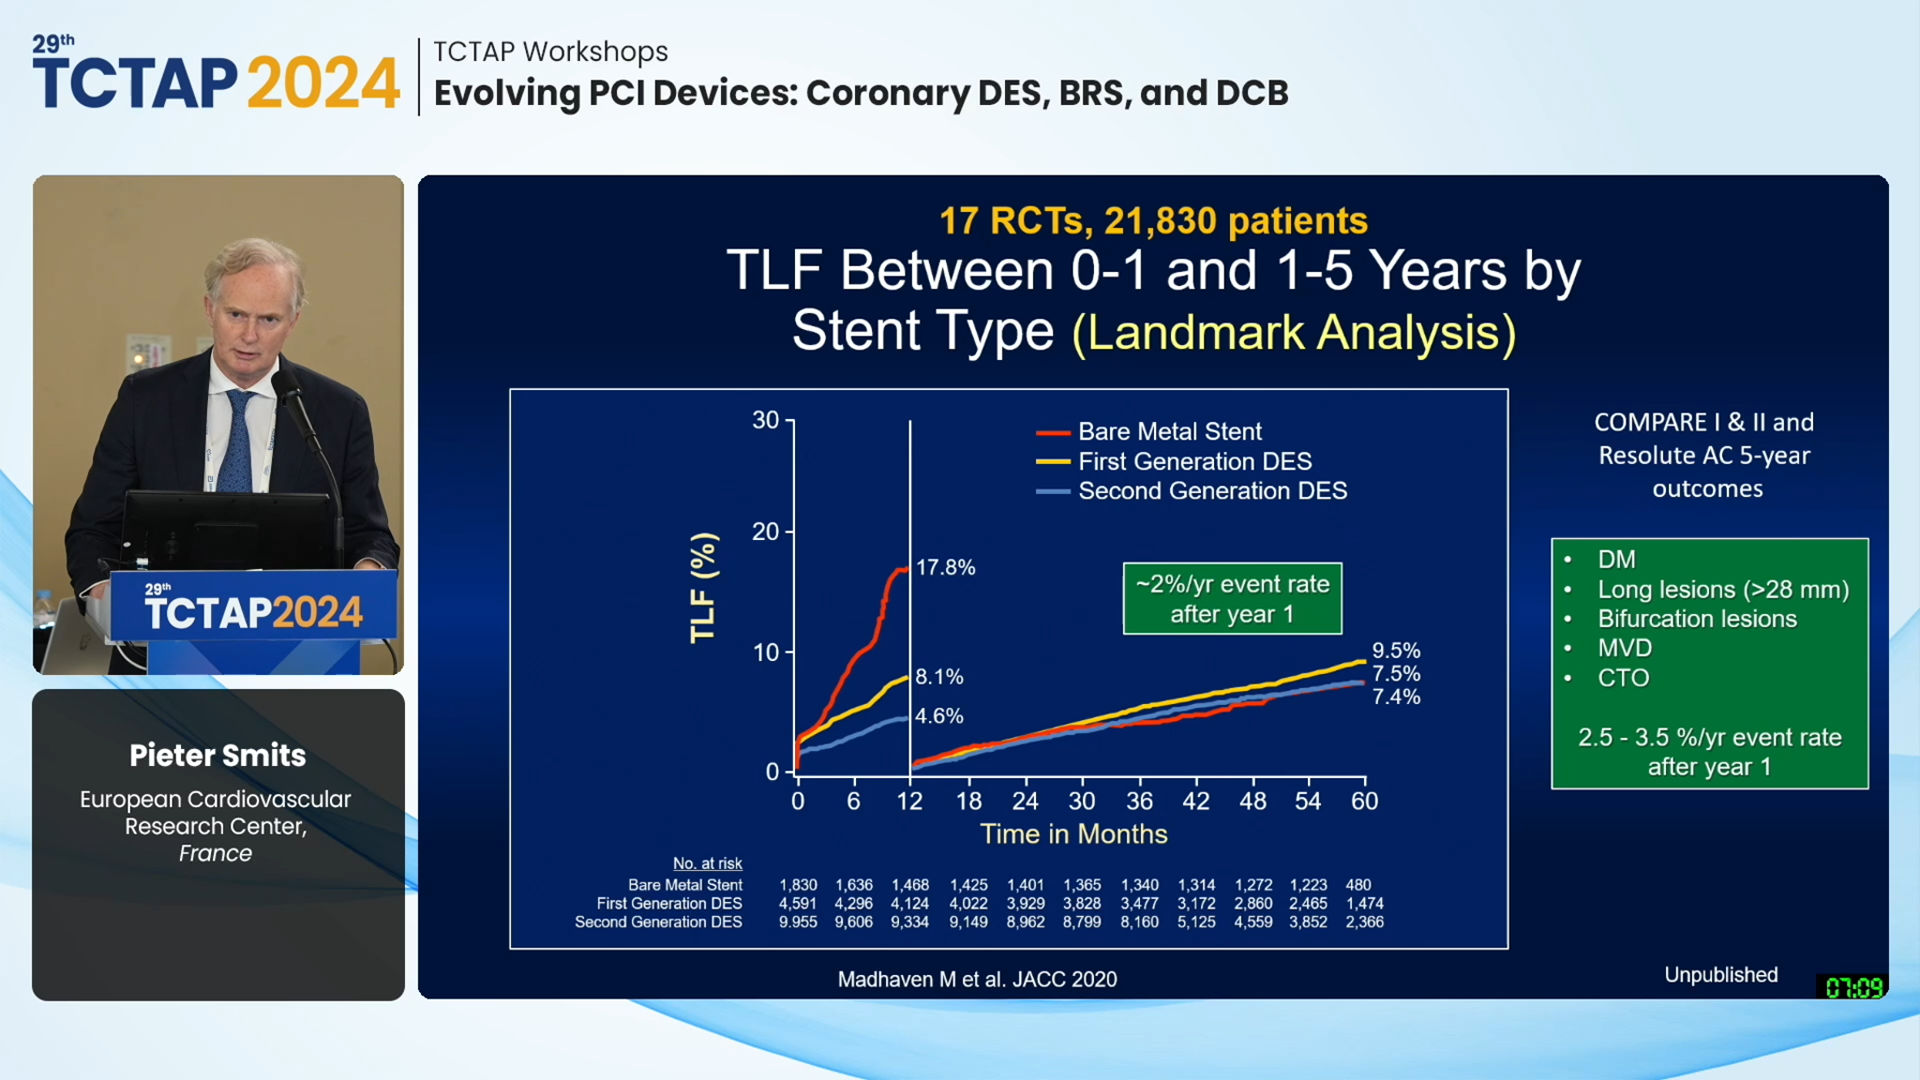 [TCTAP Workshops] Evolving PCI Devices: Coronary DES, BRS, and DCB